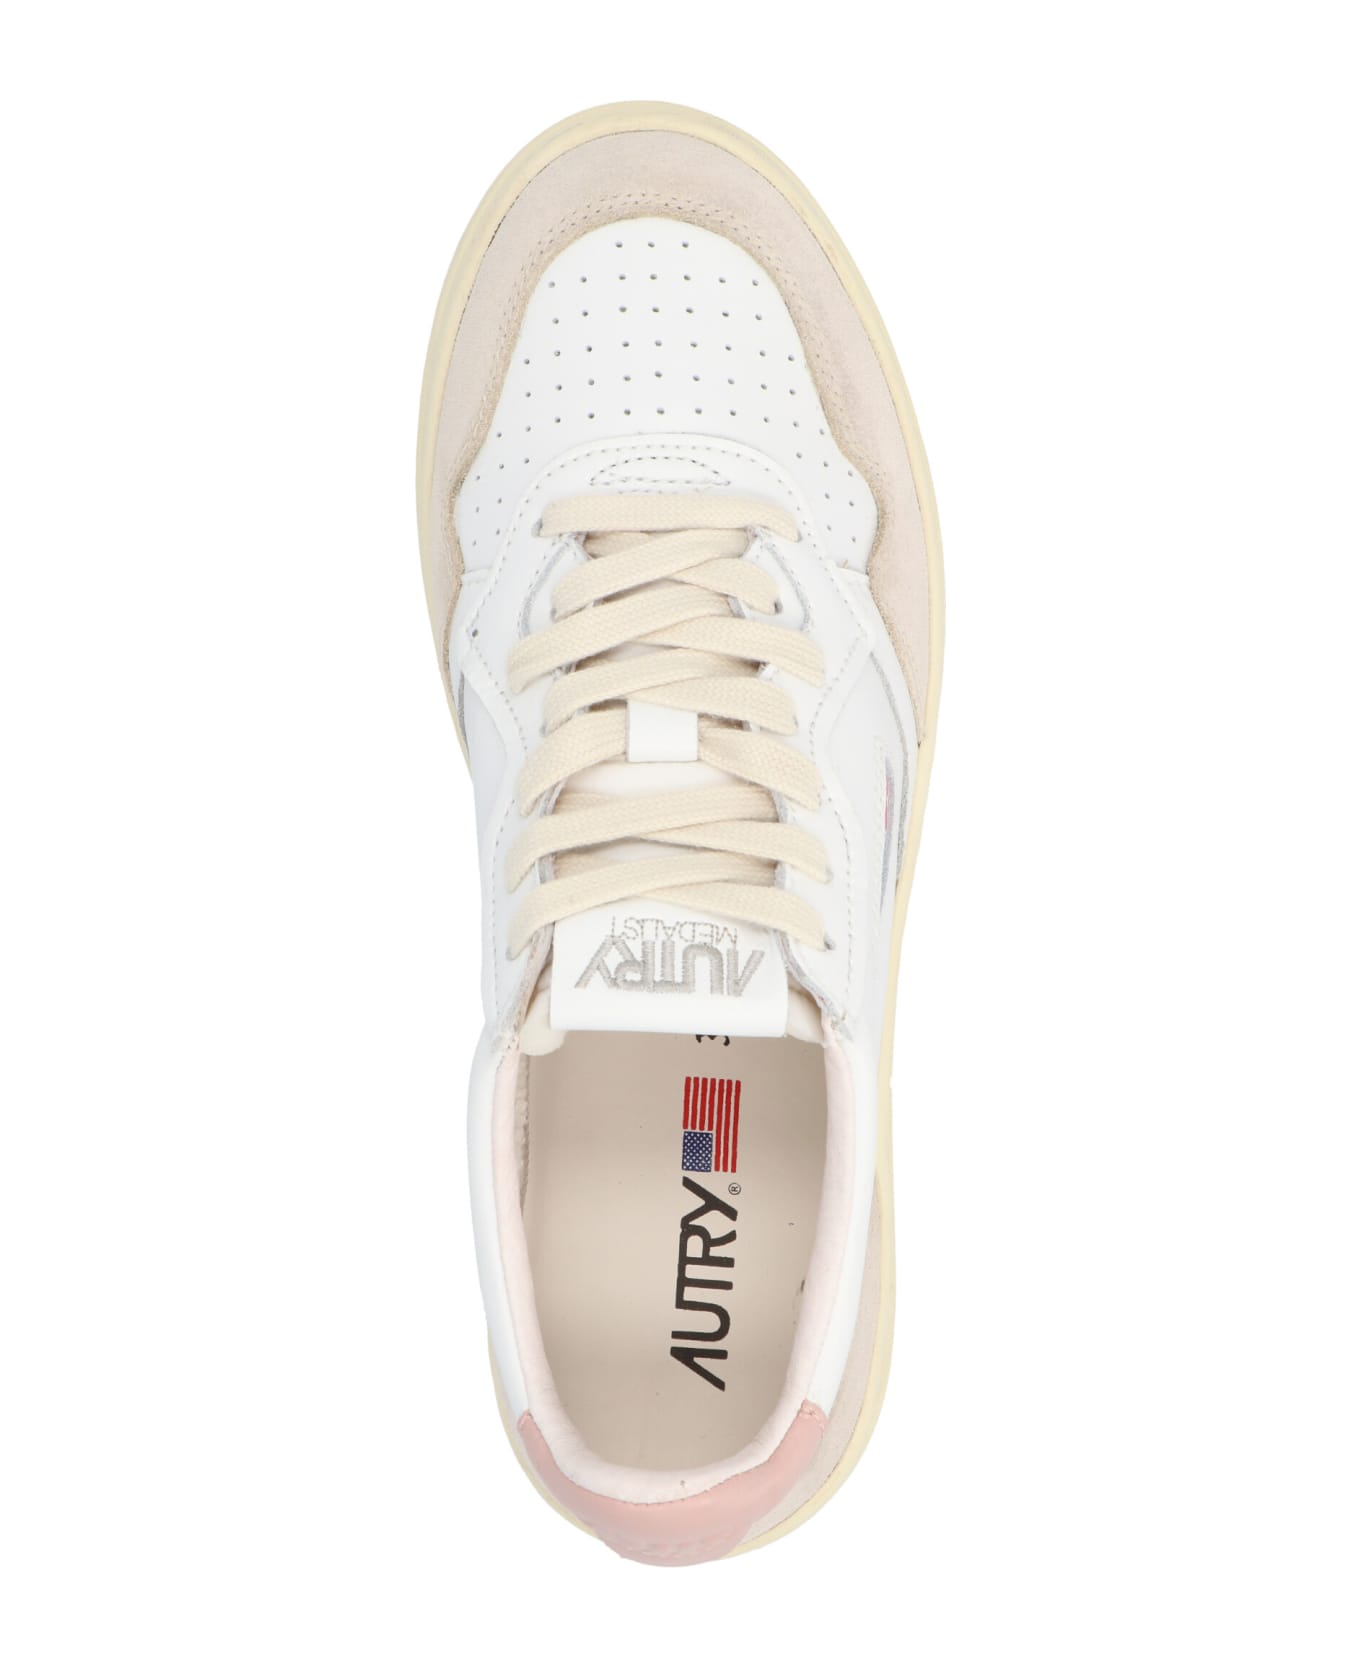 Autry Medalist Low Sneakers In White And Powder Suede And Leather - Bianco